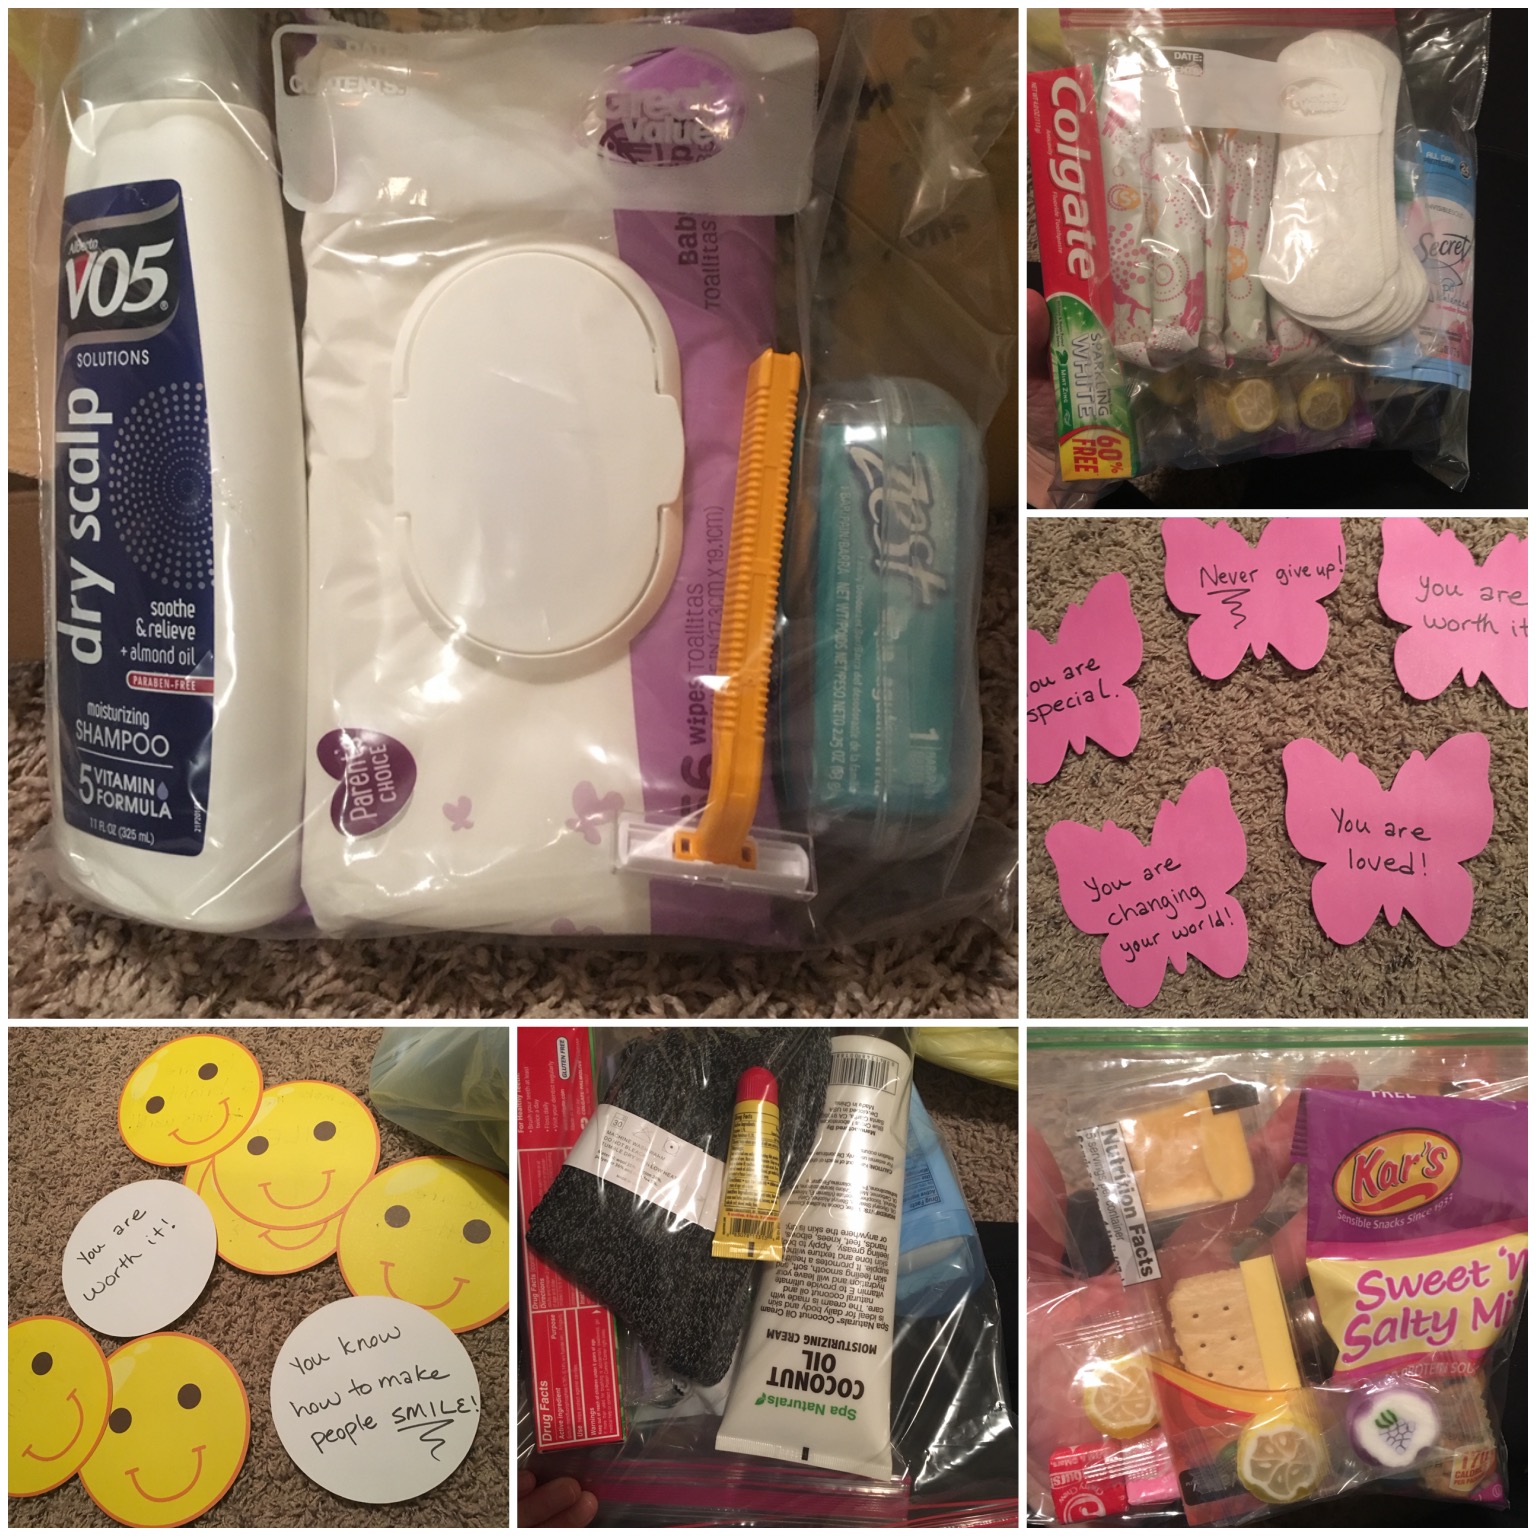   The Homeless Alliance  Q: What was in the goodie bags you were handing out? A: Each bag had a bottle of shampoo, a pretty decent sized package of baby wipes, bar of soap with a travel container, razor, bottle of lotion, tube of Carmex, stick of deo